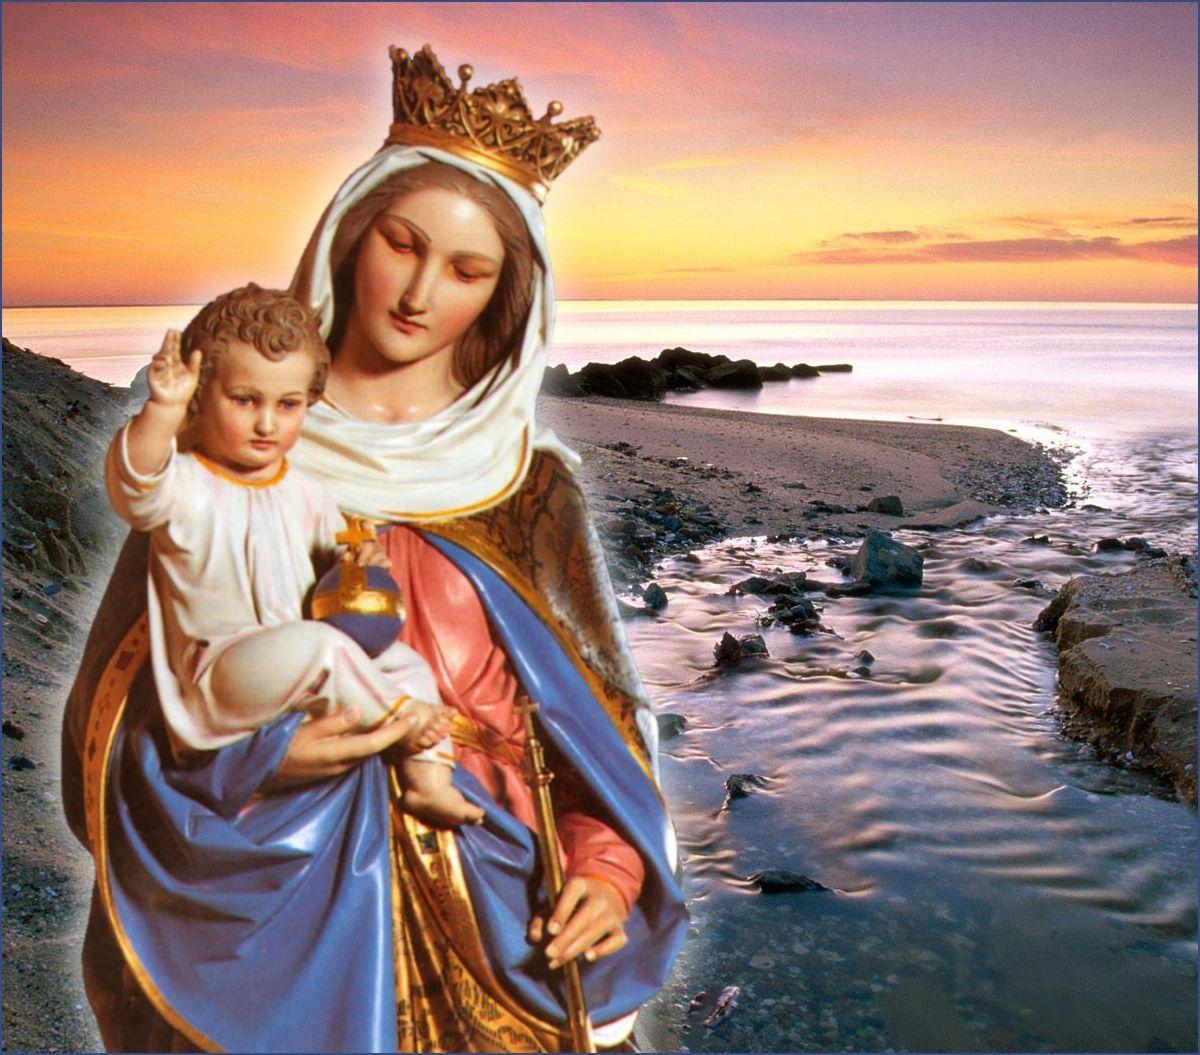 GLORY BE TO JESUS AND MARY